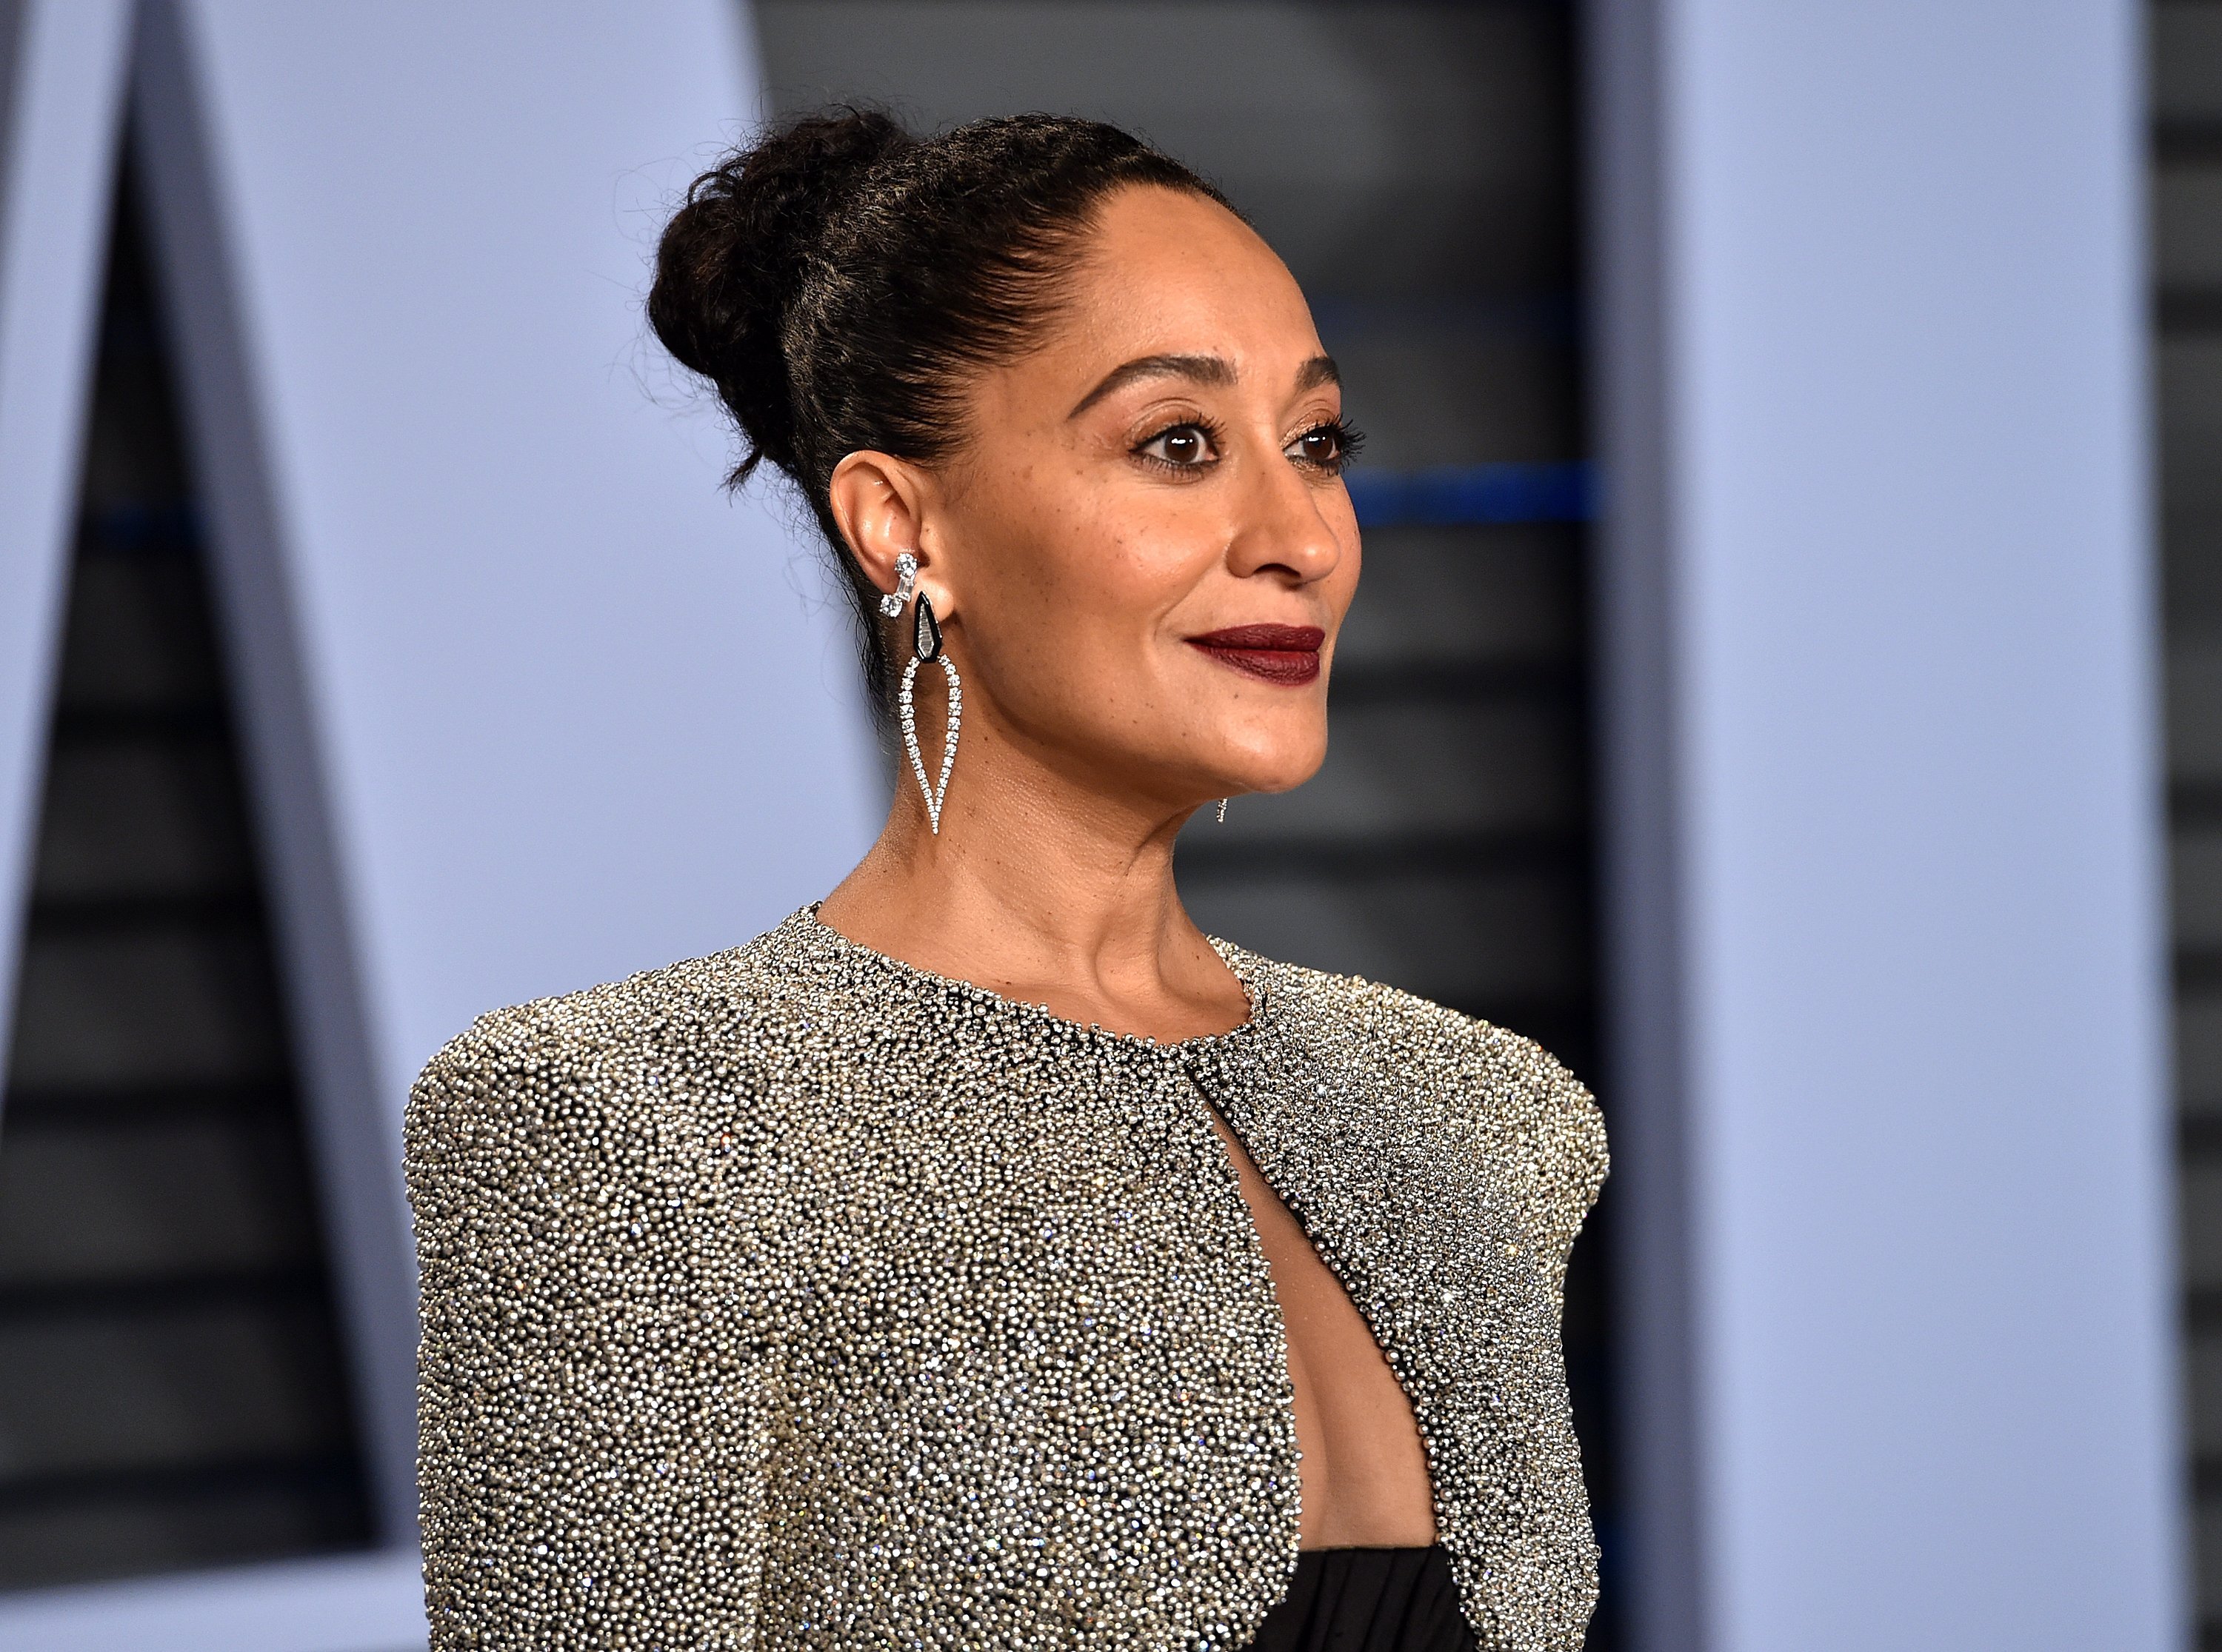 Tracee Ellis Ross attending the 2018 Vanity Fair Oscar Party. | Photo: Getty Images